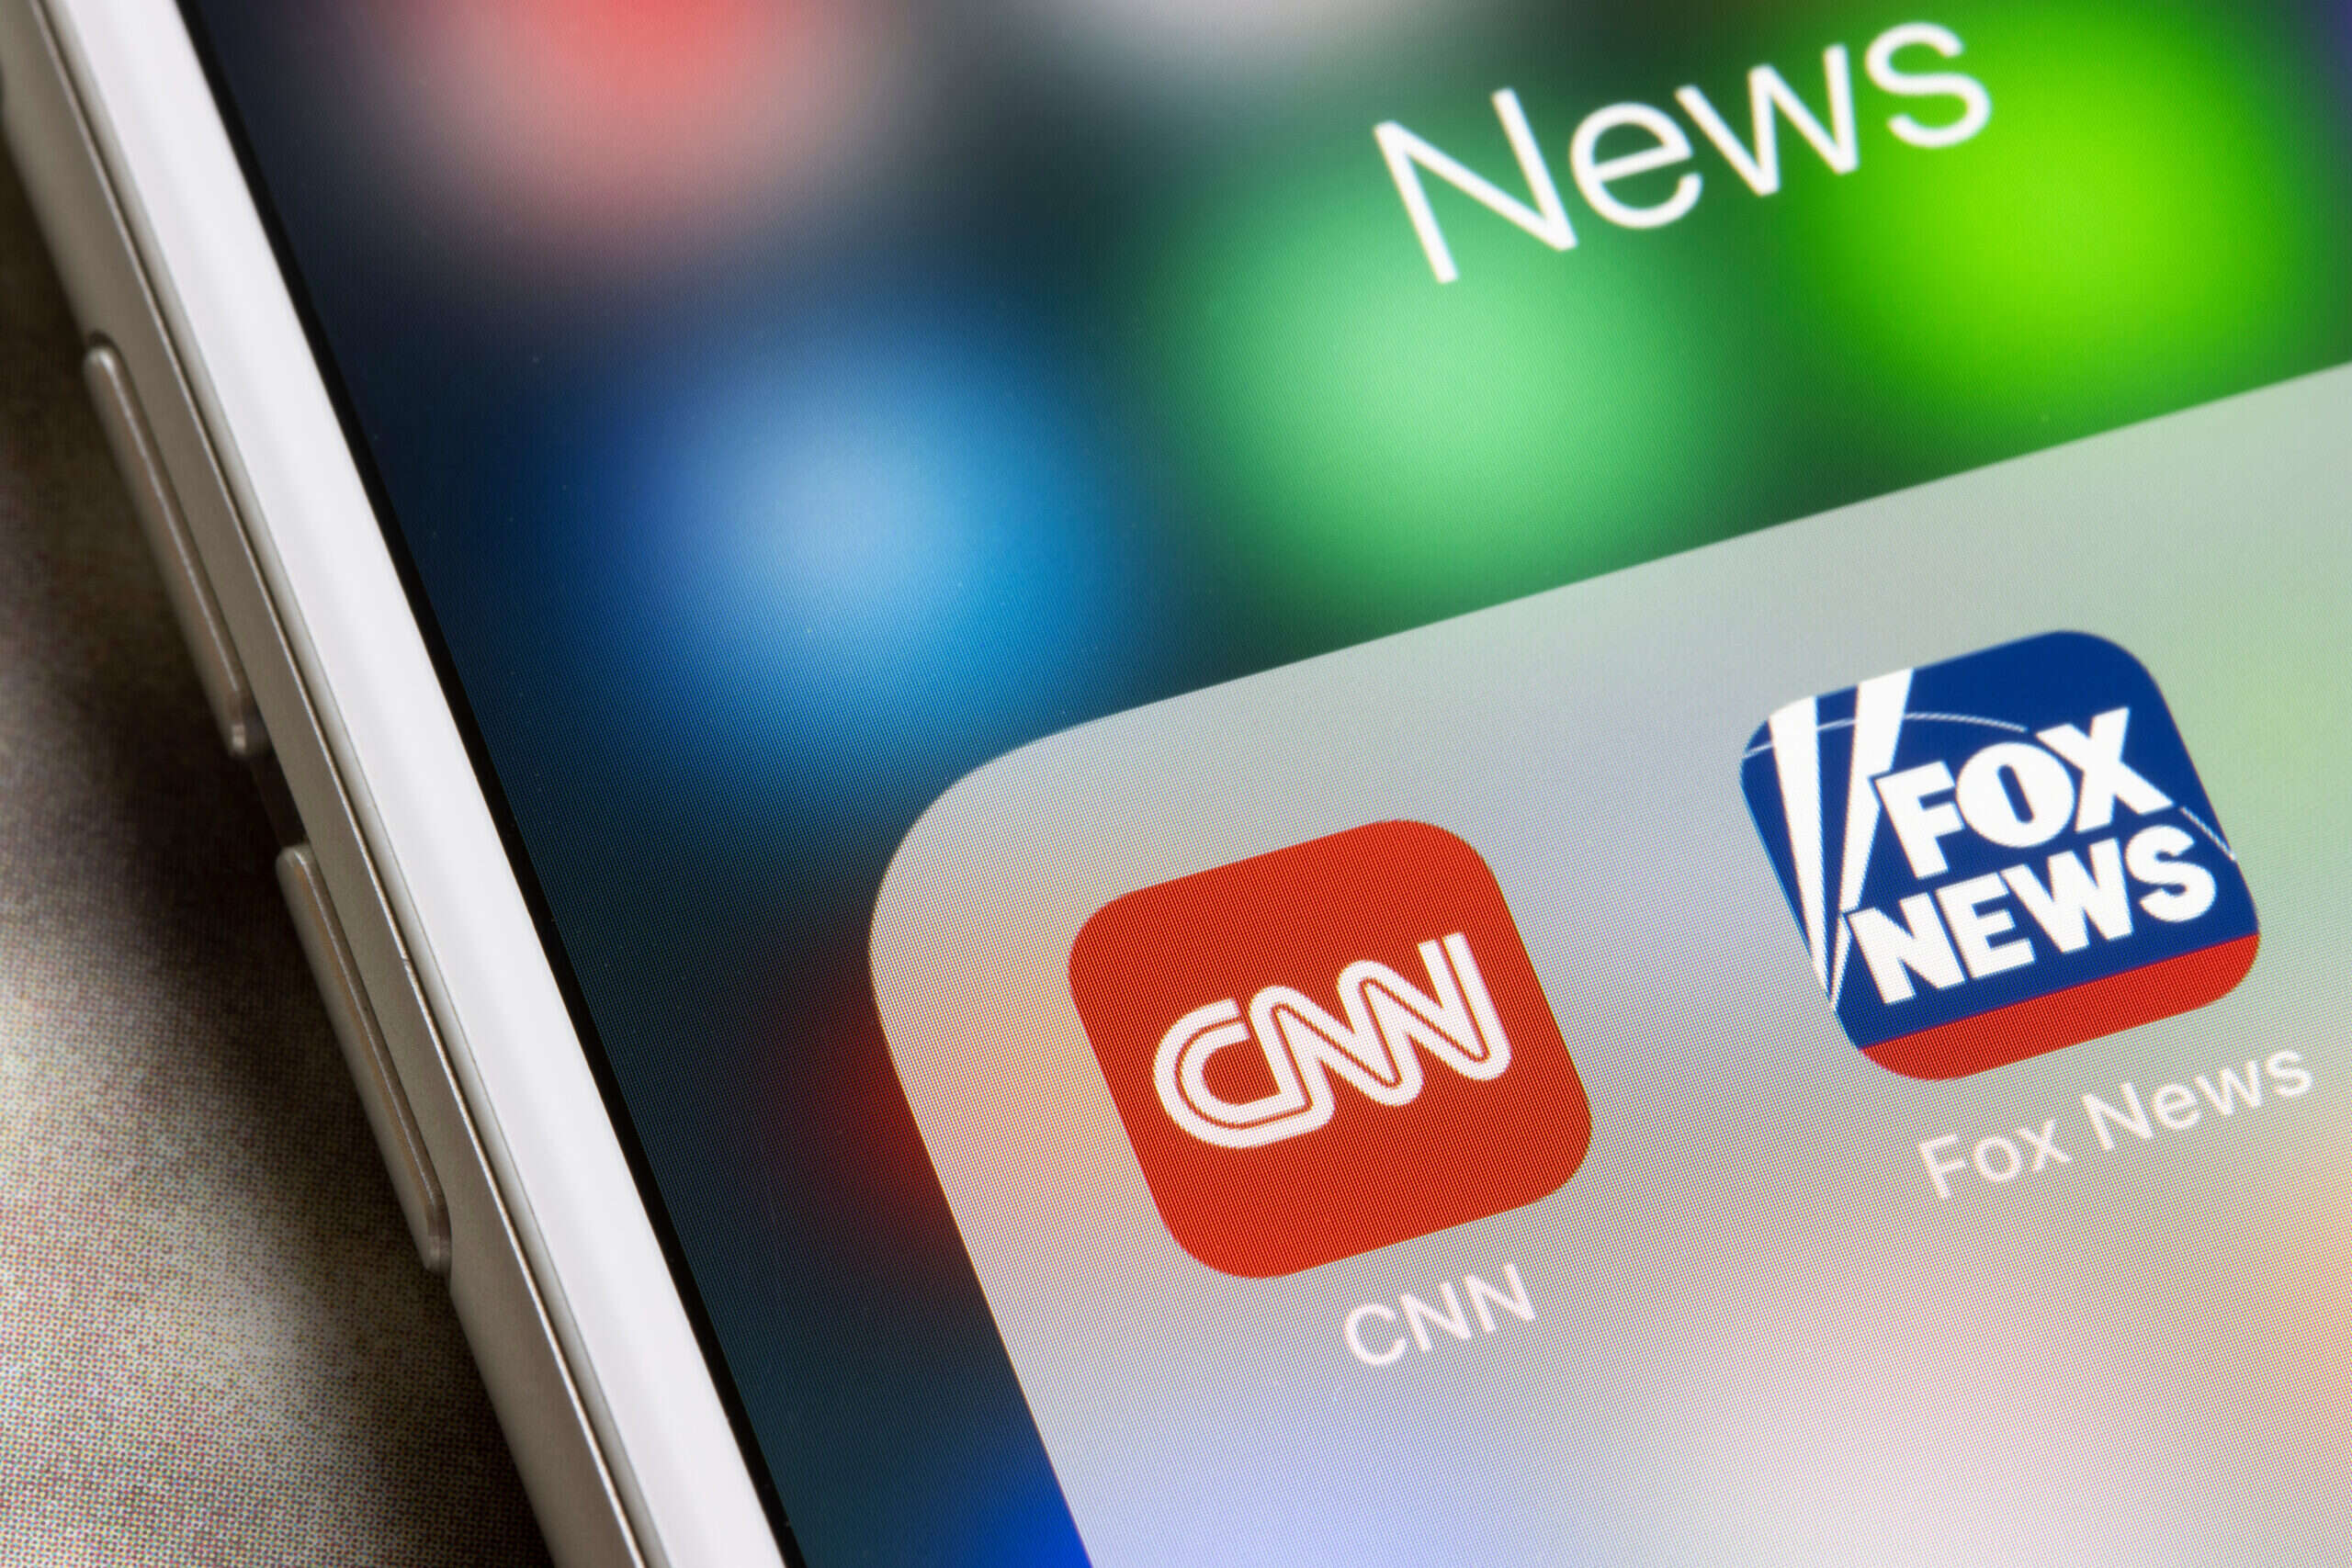 Americans' trust in news continues to decline, says new survey